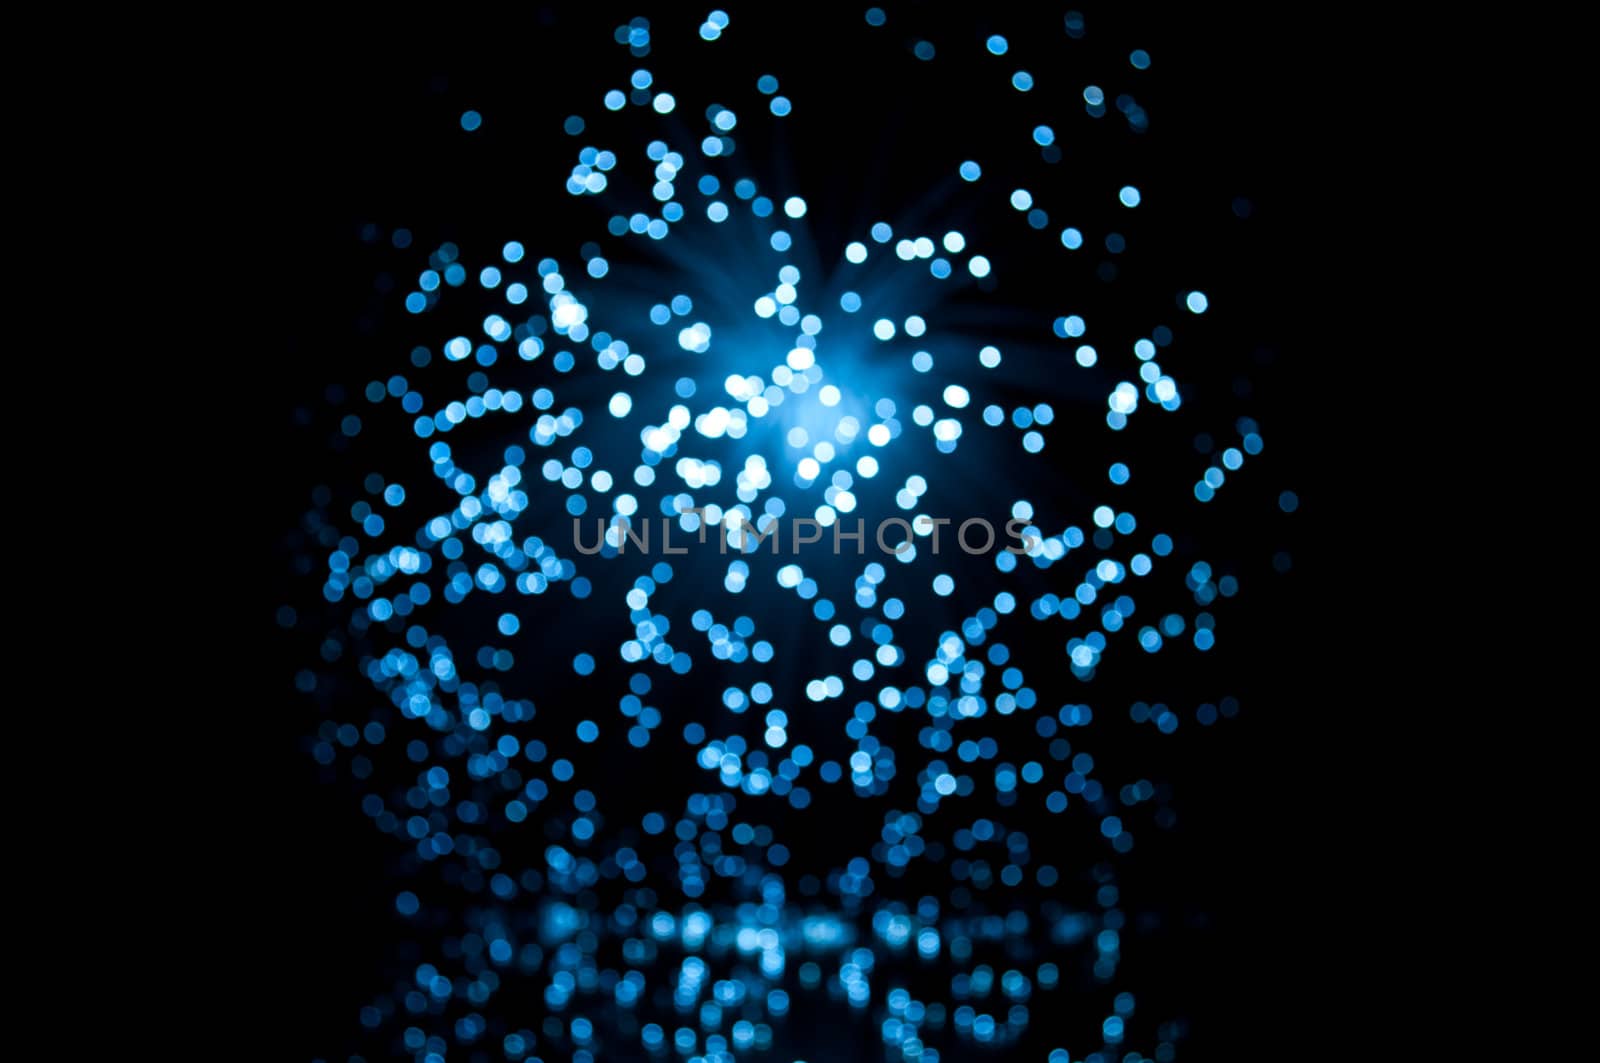 Abstract blur capturing the ends of illuminated fibre optic light strands.